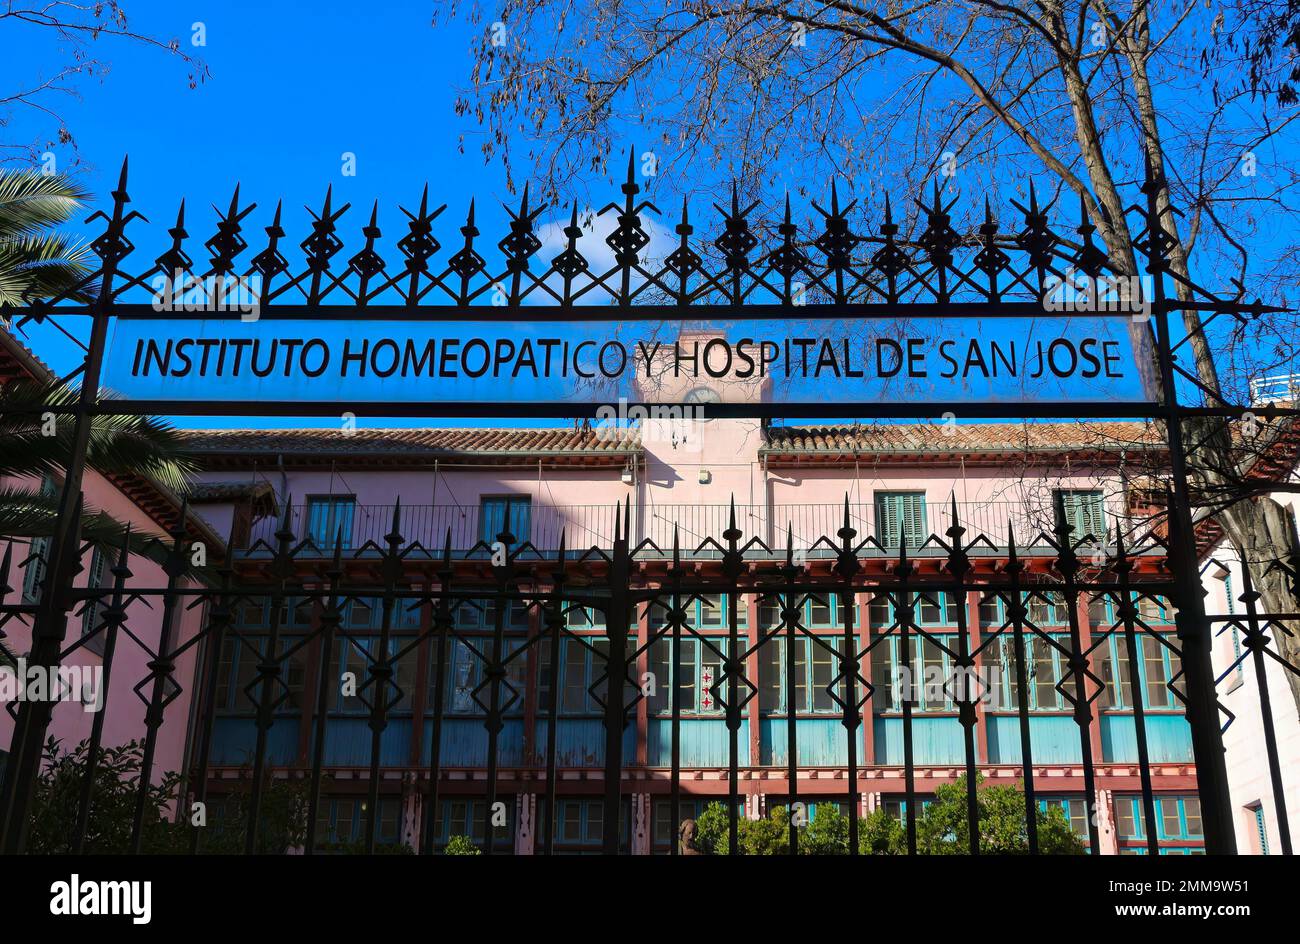 Entrance sign and iron fence The Homeopathic Institute and Hospital of San José designed by José Segundo de Lema Madrid Spain Stock Photo